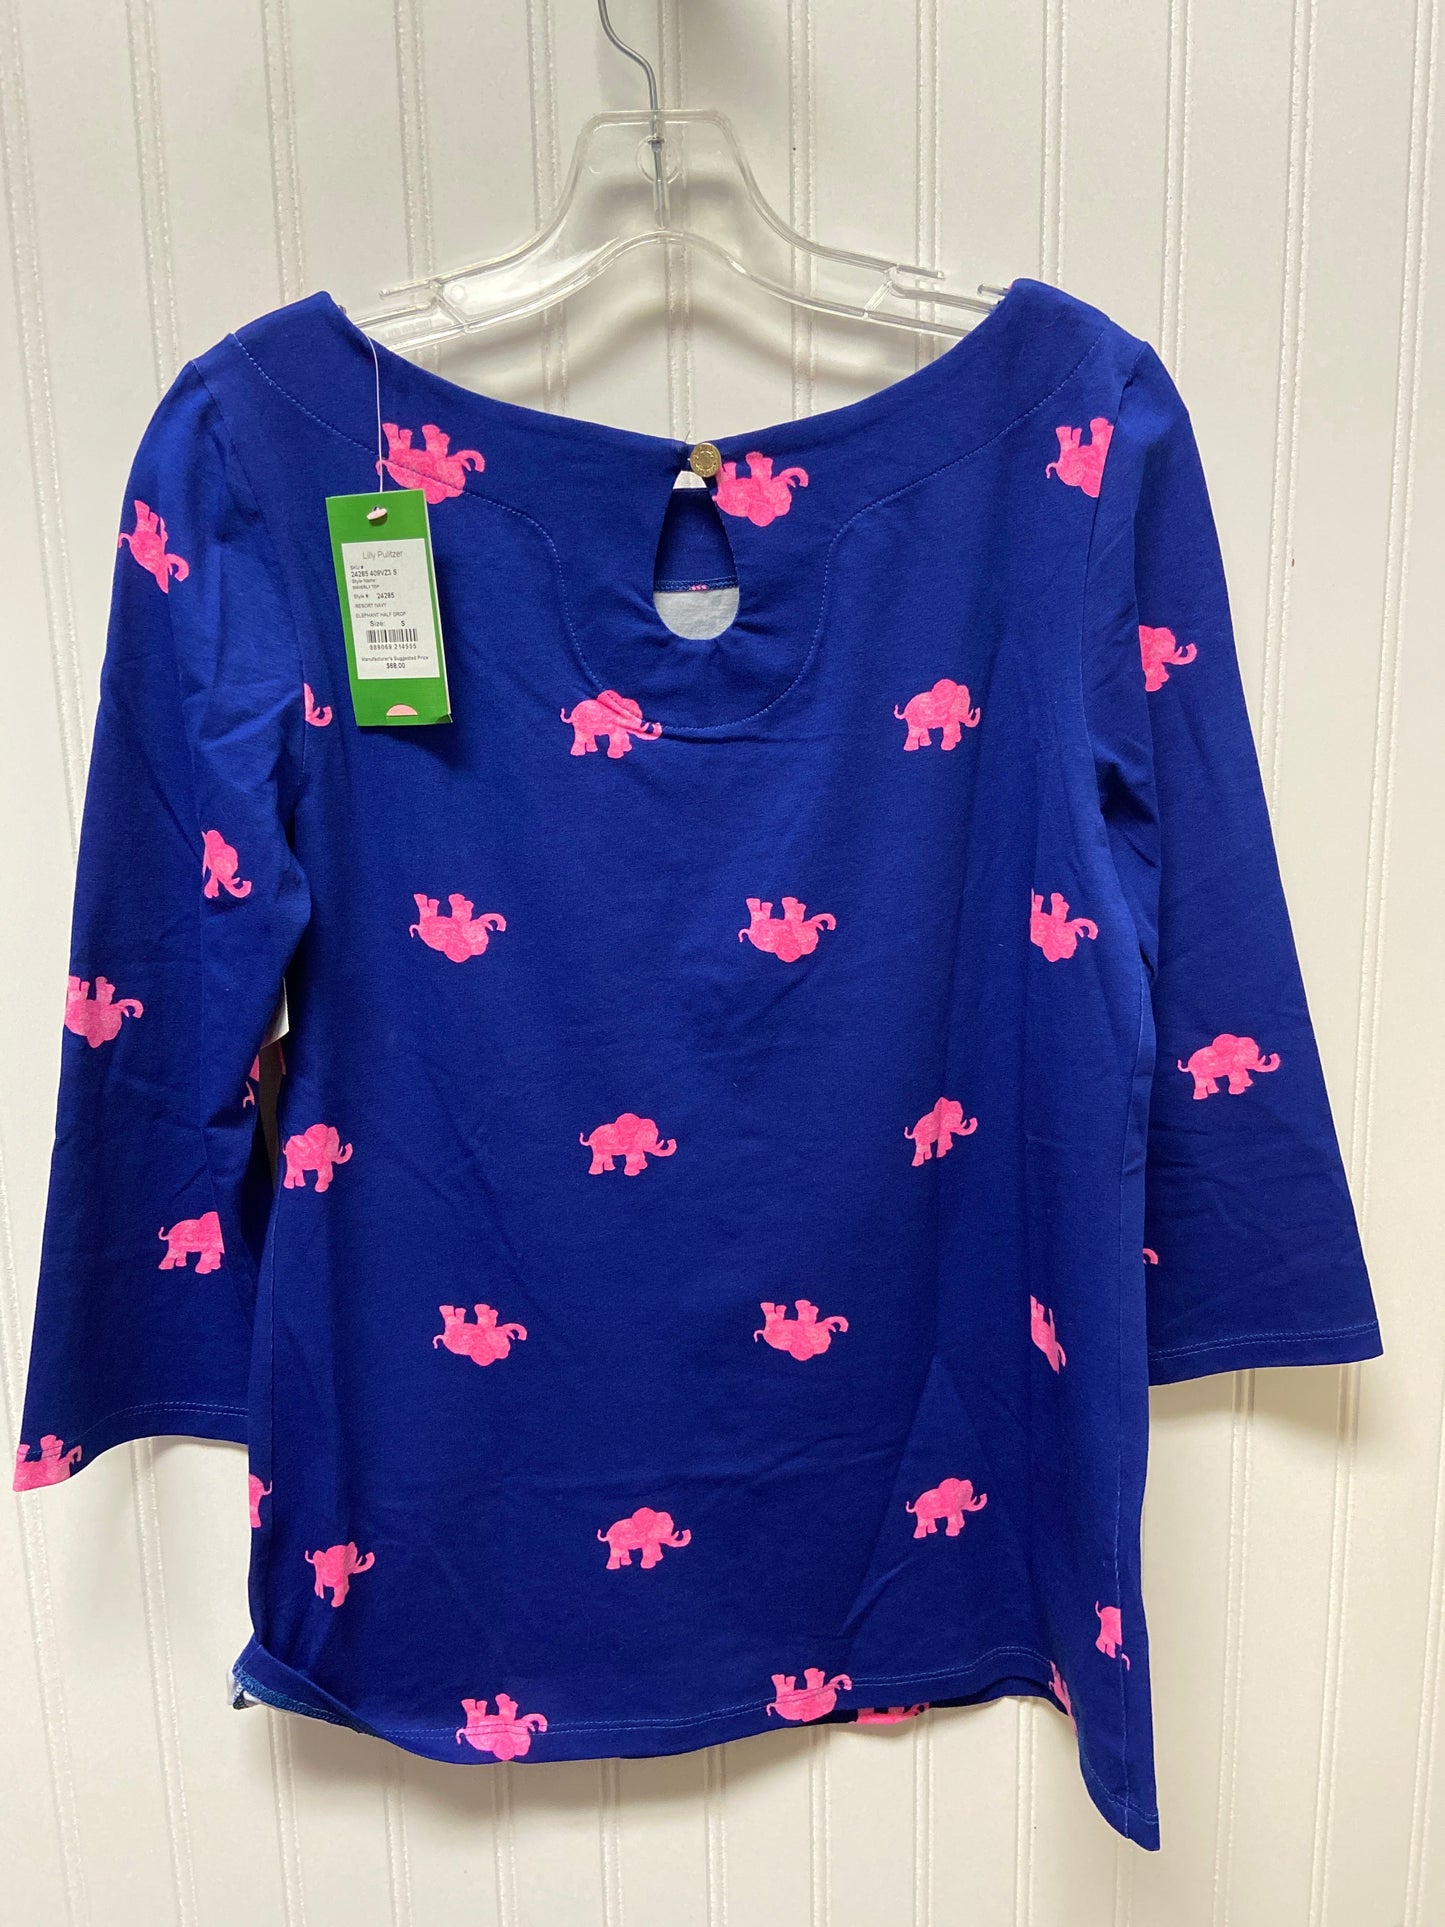 Navy Top Long Sleeve Designer Lilly Pulitzer, Size S